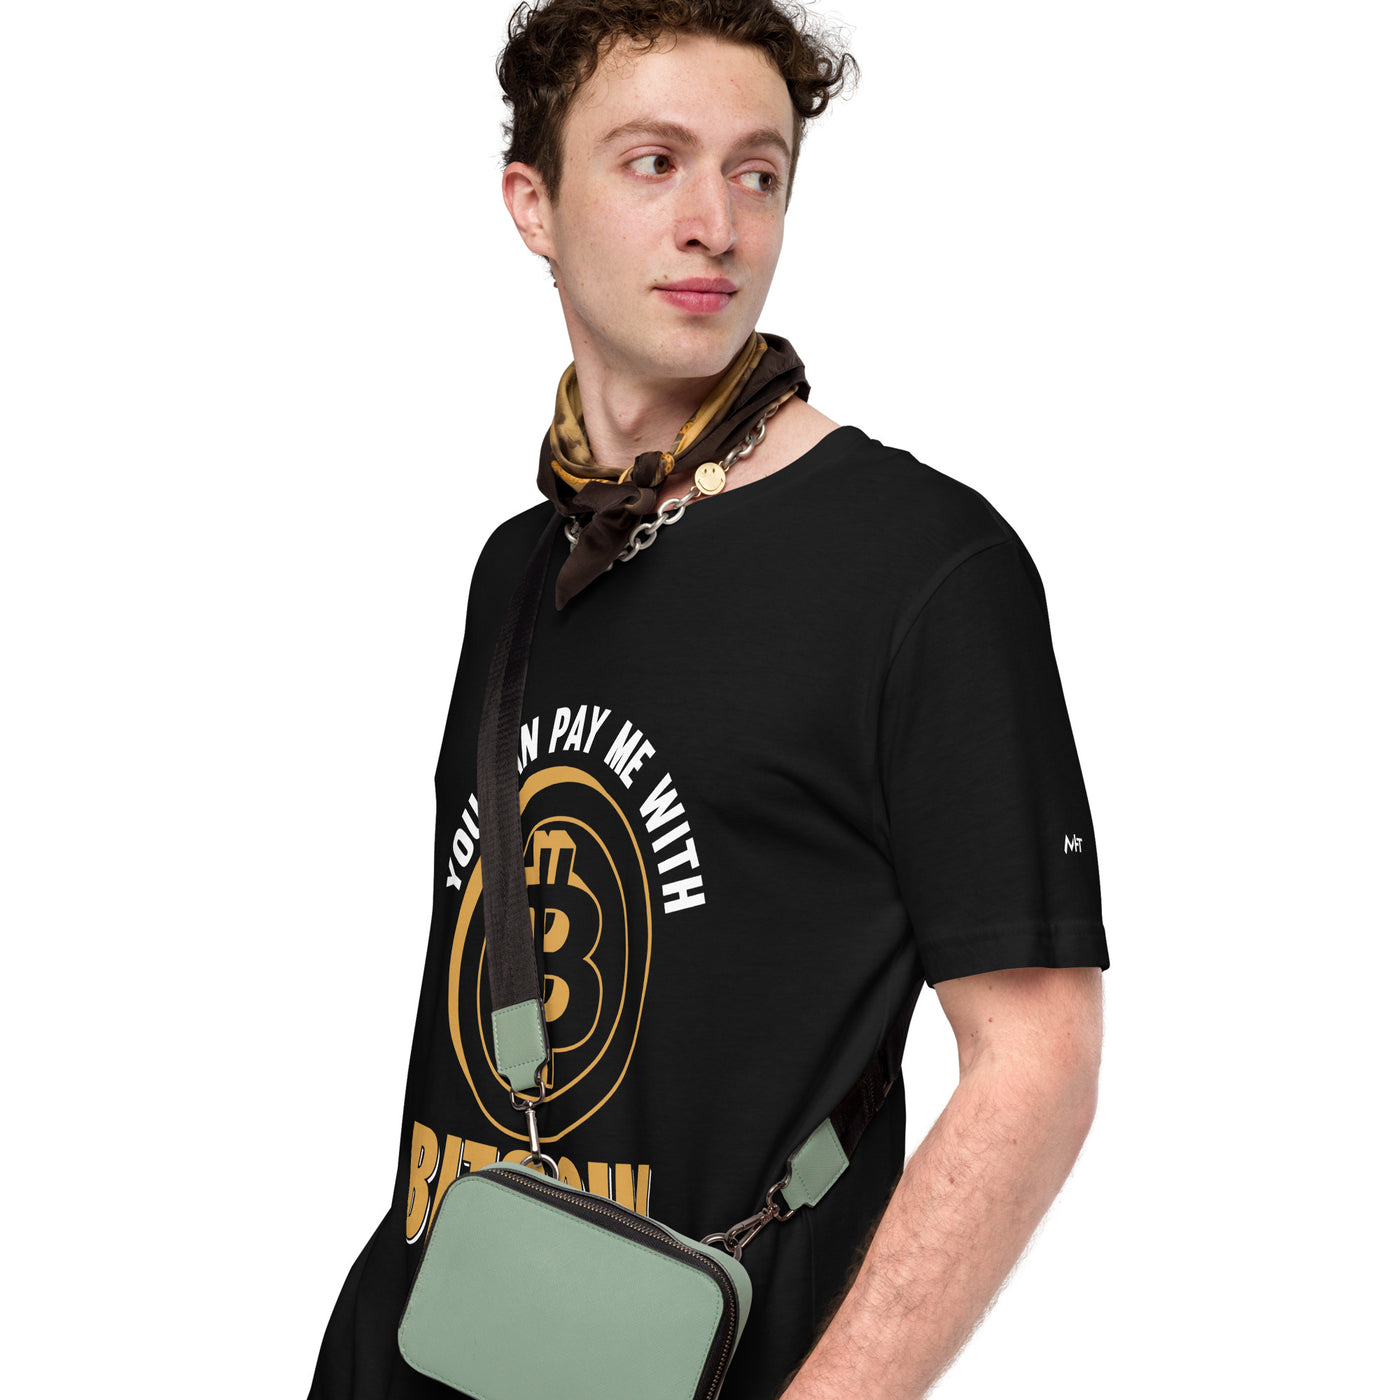 You can Pay me with Bitcoin Unisex t-shirt